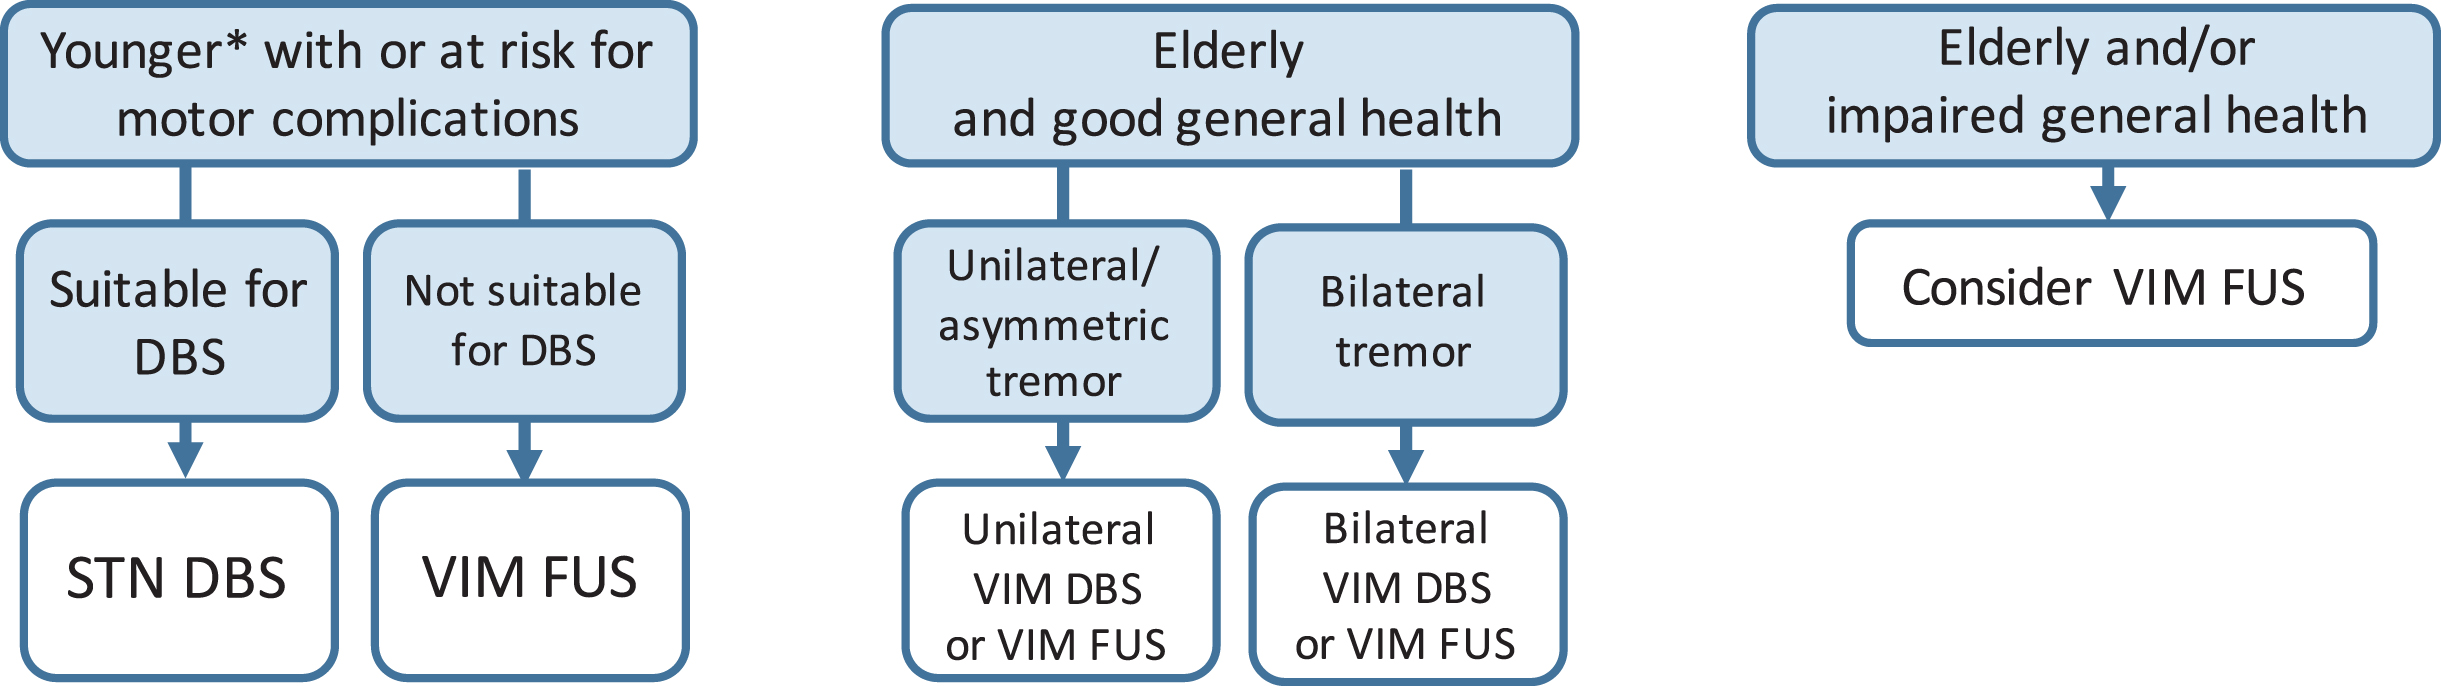 Surgical options in-drug refractory PD tremor. *Age limit for STN DBS in patients with established motor complications 70–75 years. Note that VIM FUS in PD is usually performed unilaterally, resulting in unilateral tremor reduction in the contralateral hemibody. PD, Parkinson’s disease; rx, risk; STN, subthalamic nucleus; DBS, deep brain stimulation; GPi, globus pallidus interna; VIM, ventral intermediate nucleus of the thalamus; FUS, high-intensity focused ultrasound.